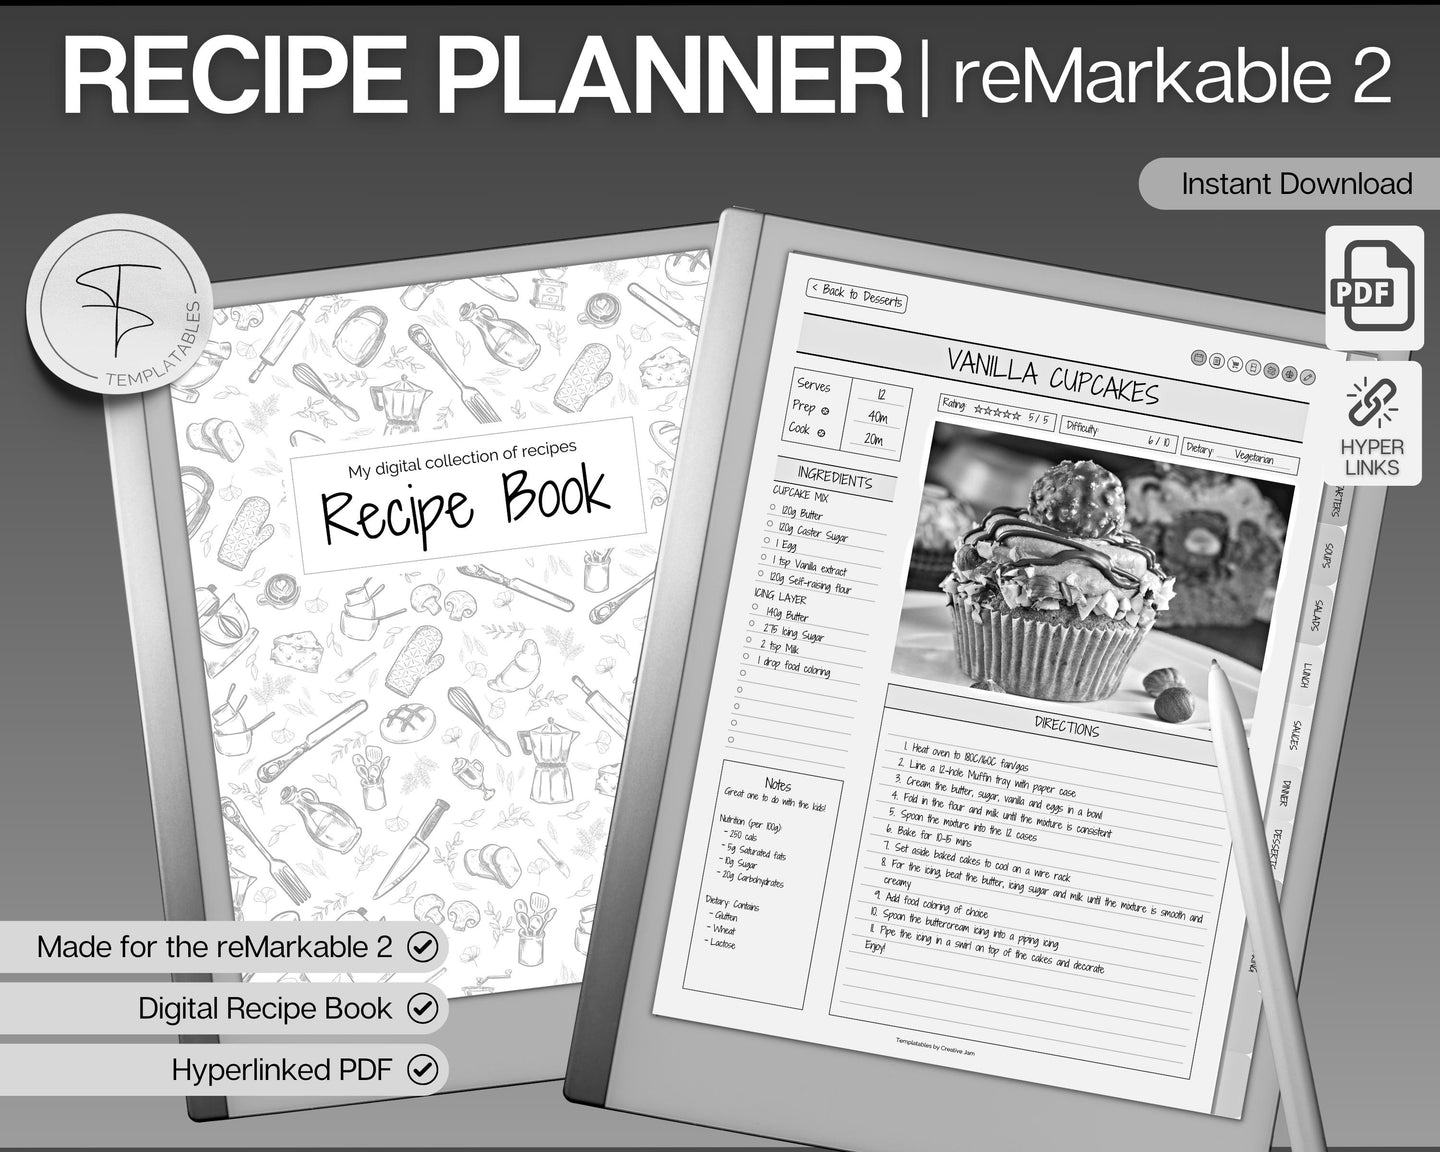 Digital Recipe Book for reMarkable 2 | With 8 Recipe Templates, Digital Meal Planner, Cookbook Template, Recipe Binder Kit & Blank Recipe Card